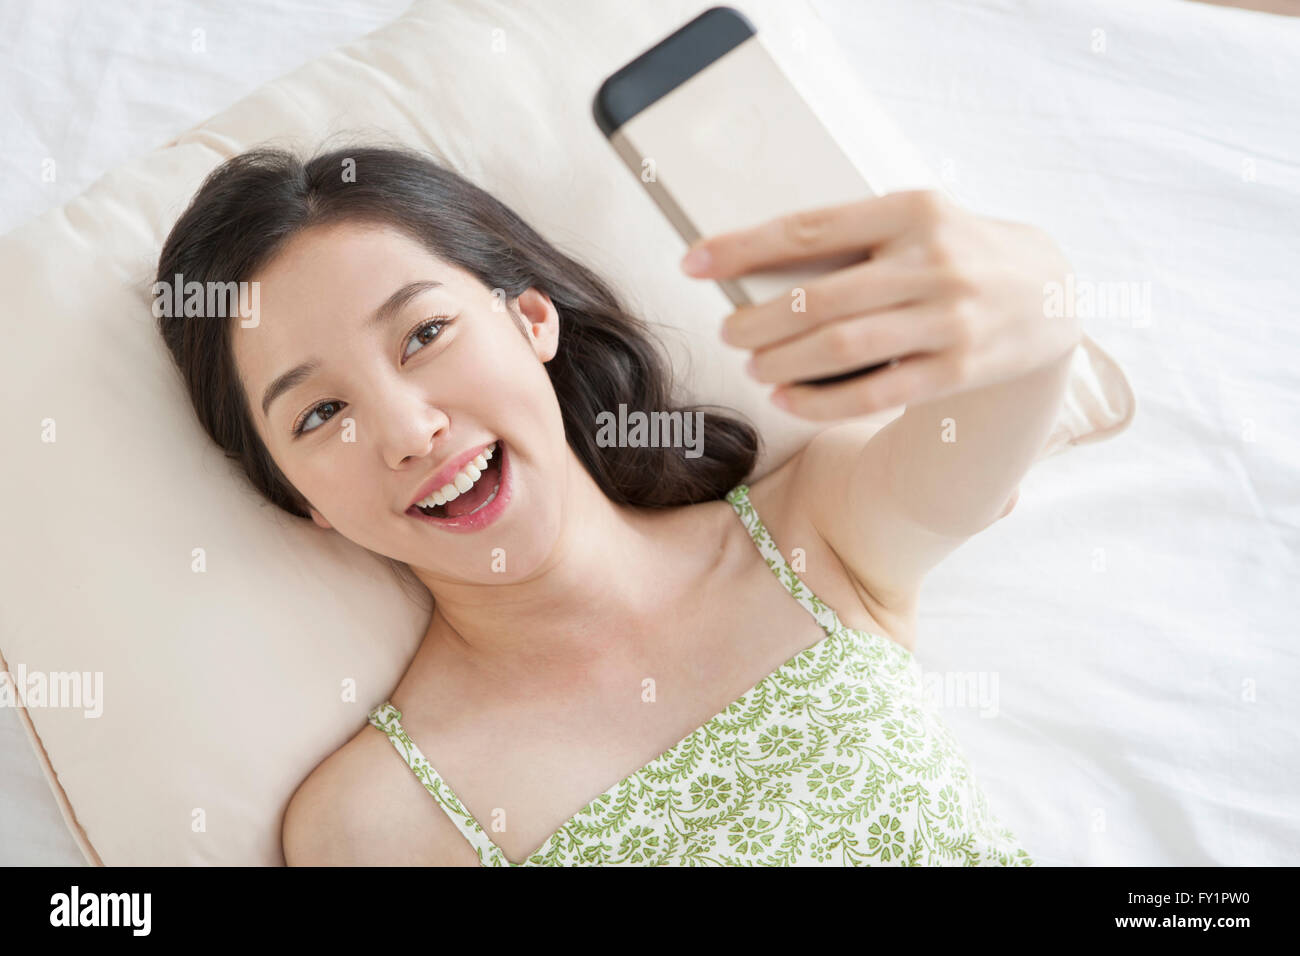 Portrait of young smiling woman lying down on bed and taking a picture of herself with smartphone Stock Photo